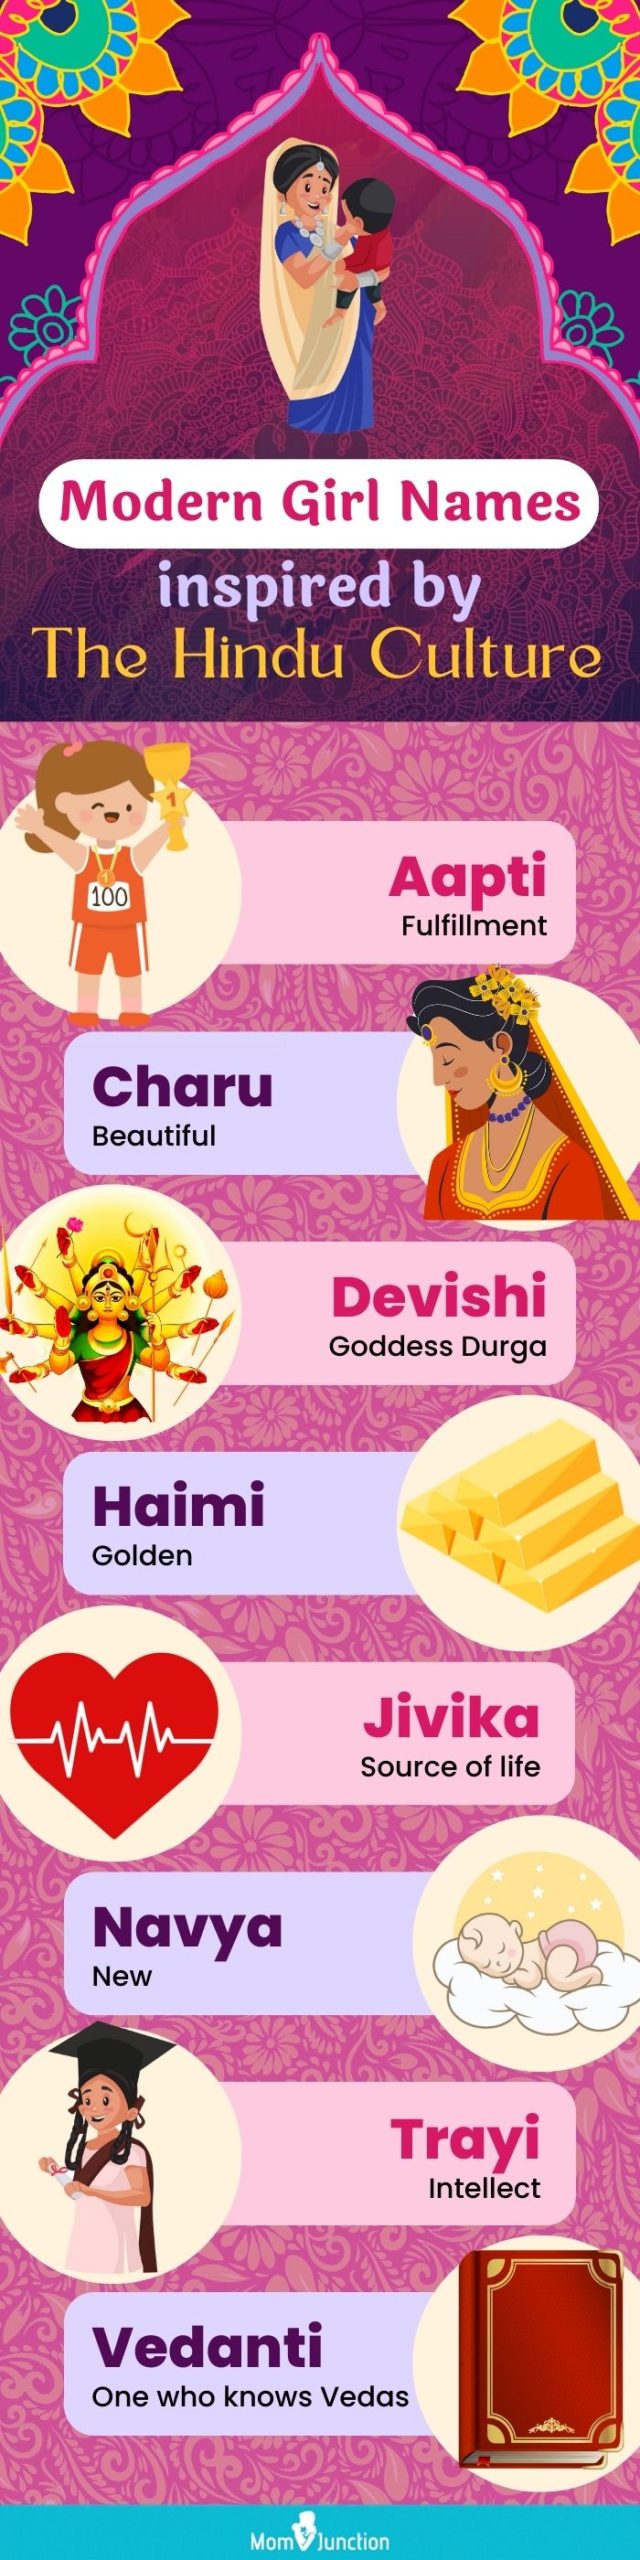 modern girl names inspired by the hindu culture [infographic]